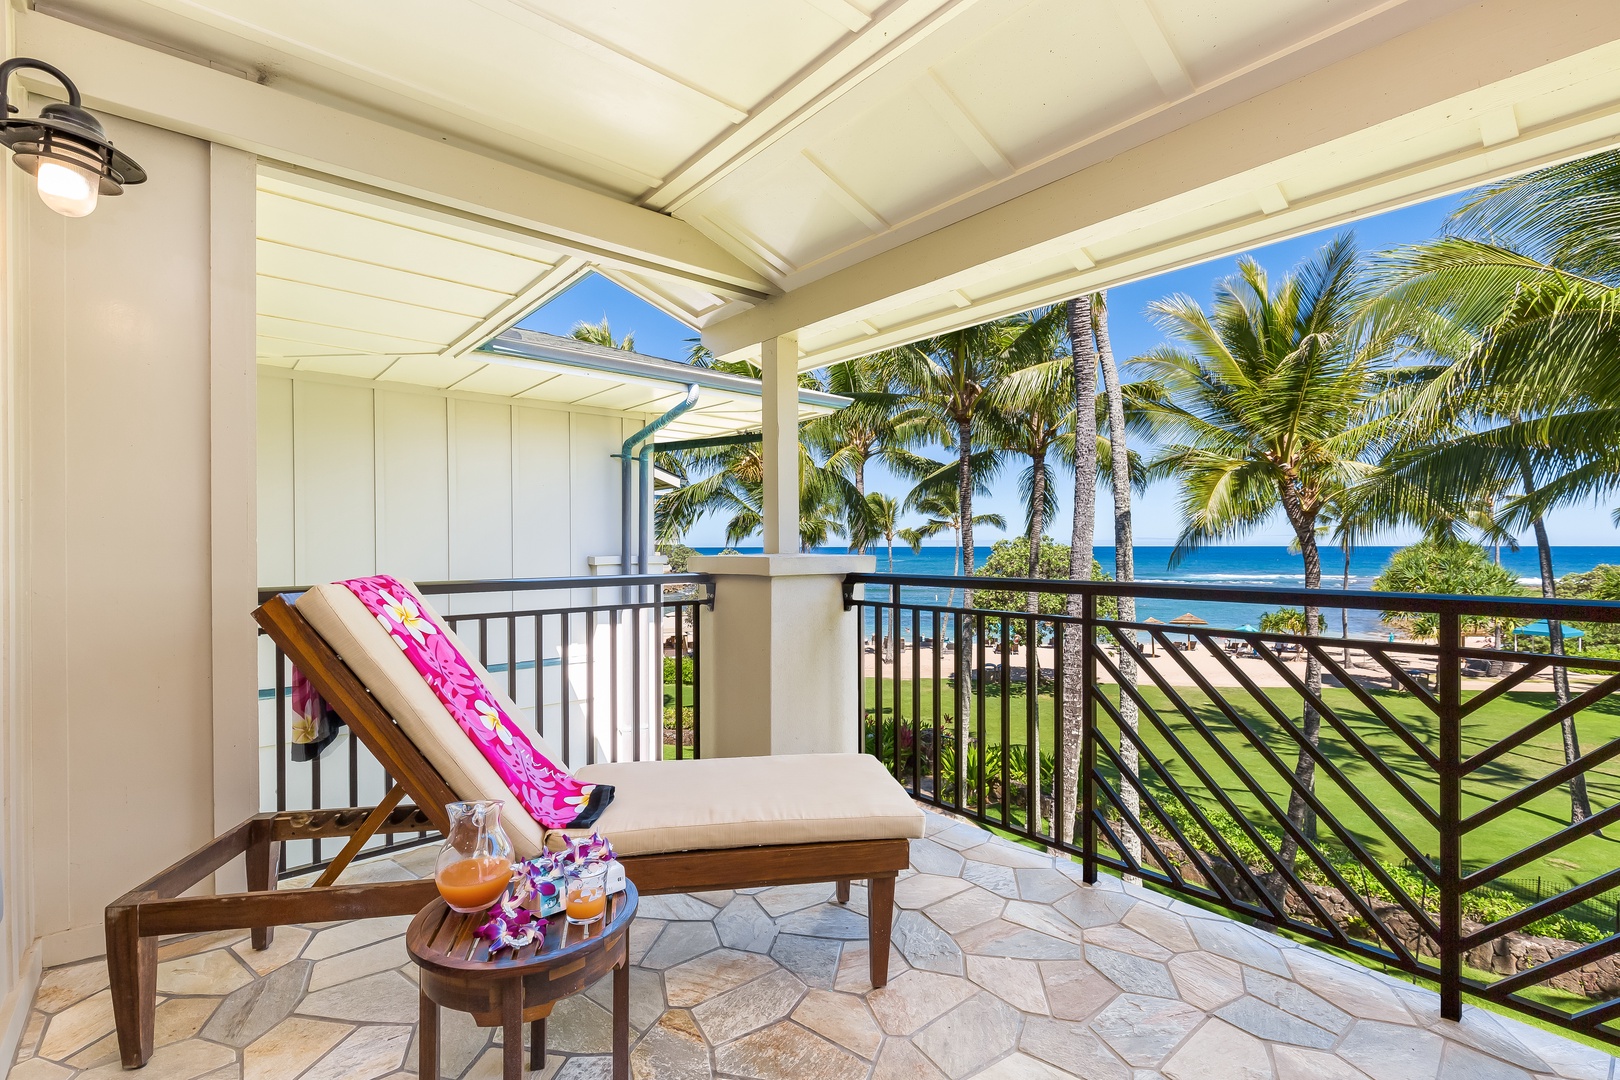 Kahuku Vacation Rentals, Turtle Bay Villas 304 - The beach is mere steps away, perfect for concluding your days in paradise with breathtaking views of the sun slipping away below the horizon.